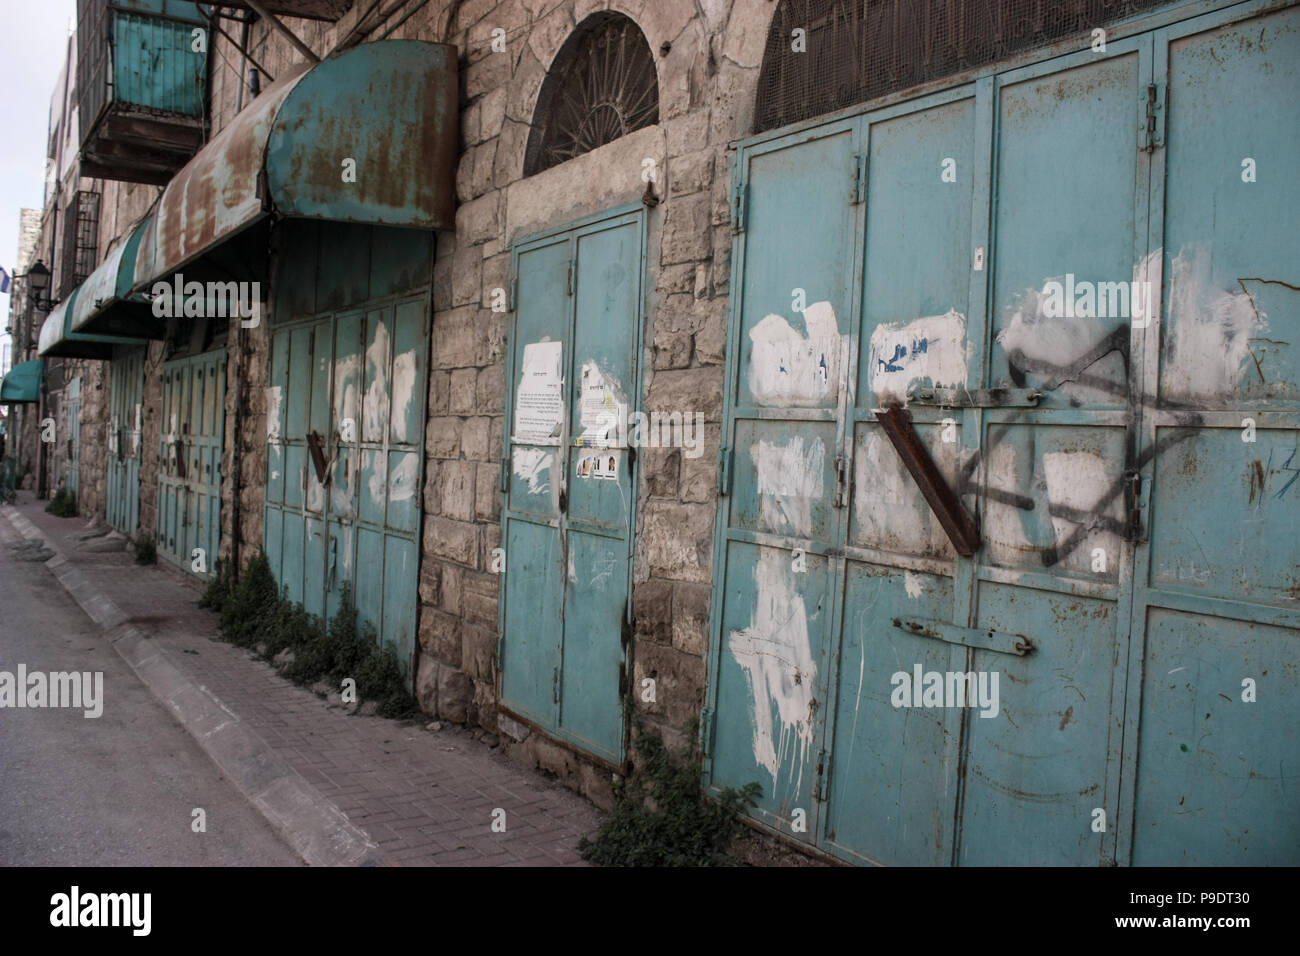 Shops welded tight by the Israeli Defense Forces in apparent protection for their illegal settlers Stock Photo